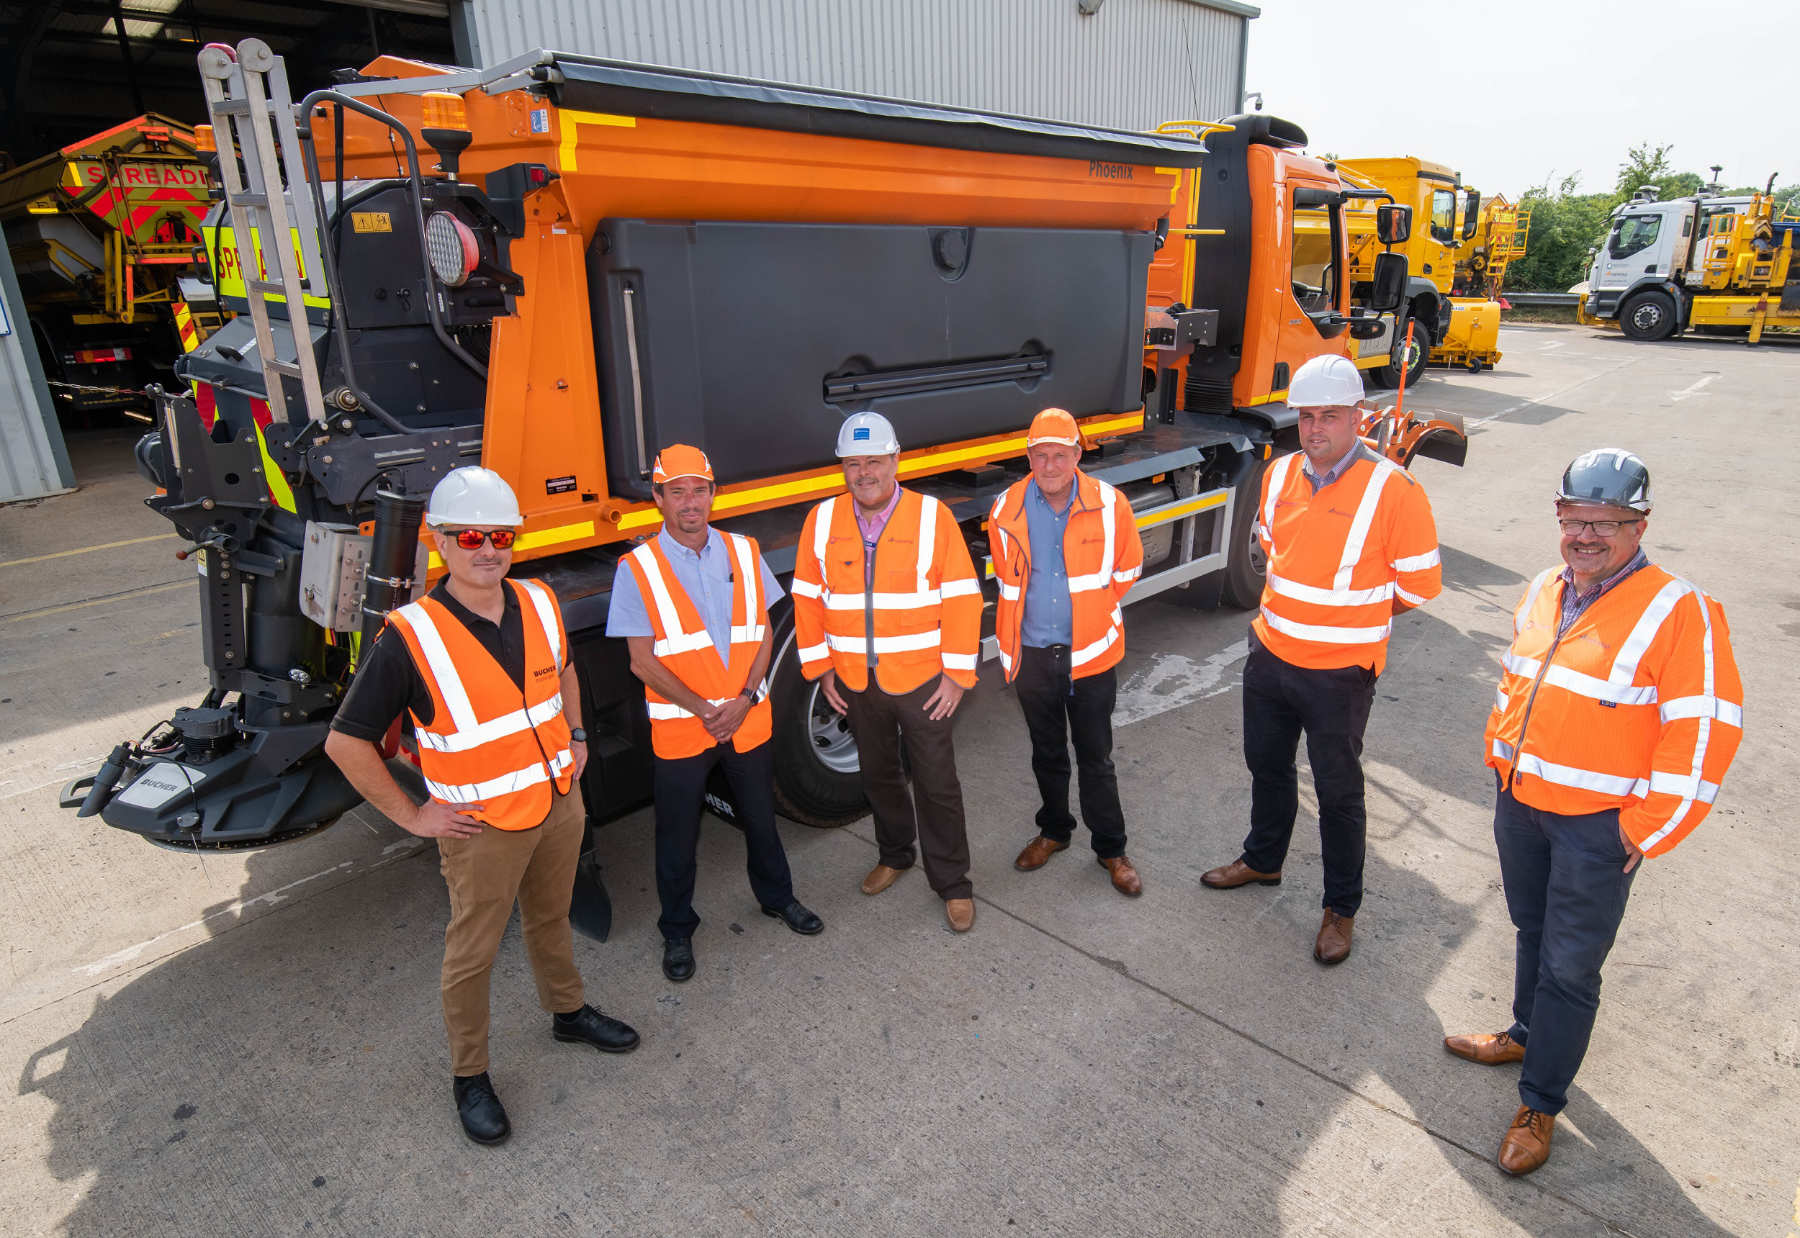 From left, Andrew Park and Chris Mitchell of Bucher Municipal, Nigel Smith, head of highway operations at North Yorkshire County Council, Rory Hanrahan and Craig Winter of NY Highways, and Mike Francis, operations manager at NY Highways